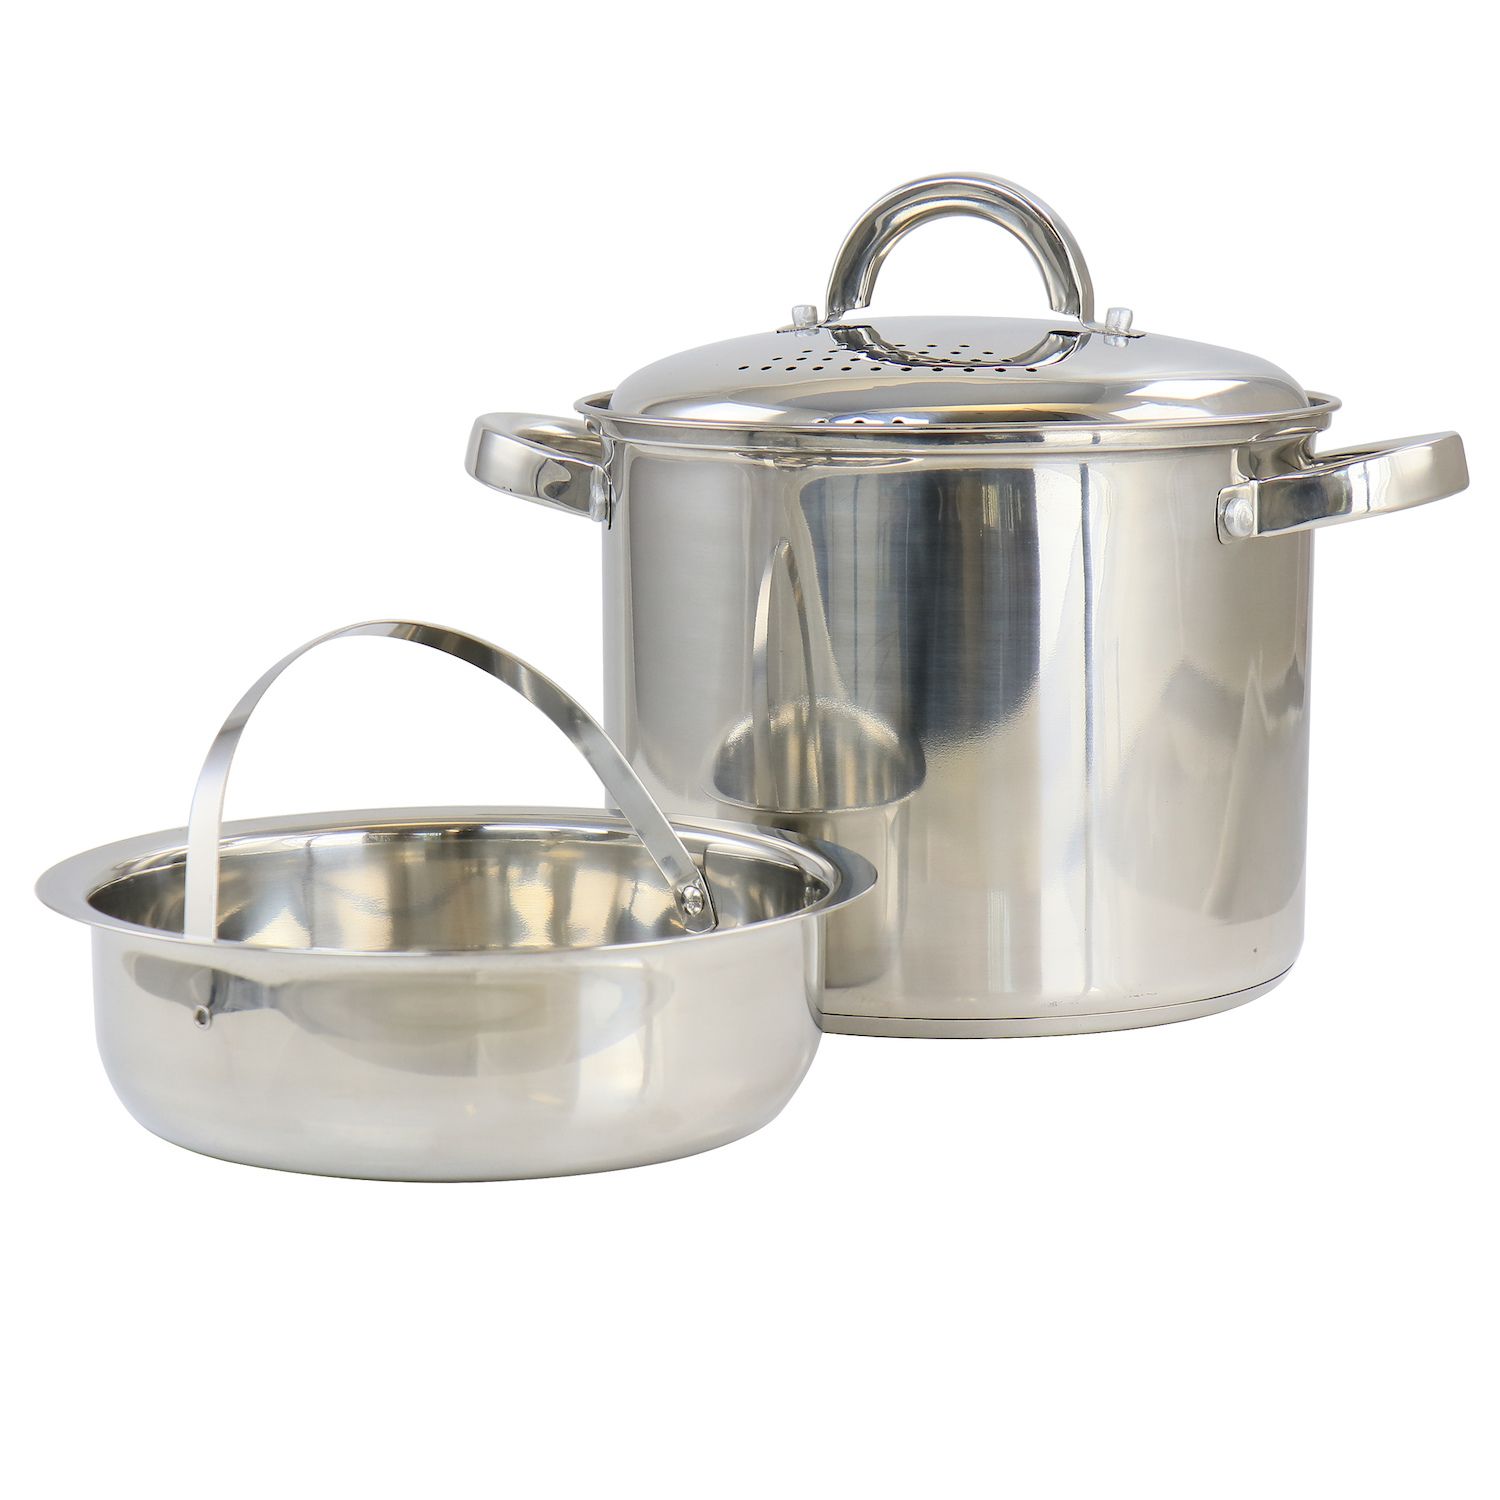 Alpine Cuisine Sauce Pan Stainless steel 3Qt Belly Shape with Glass Li